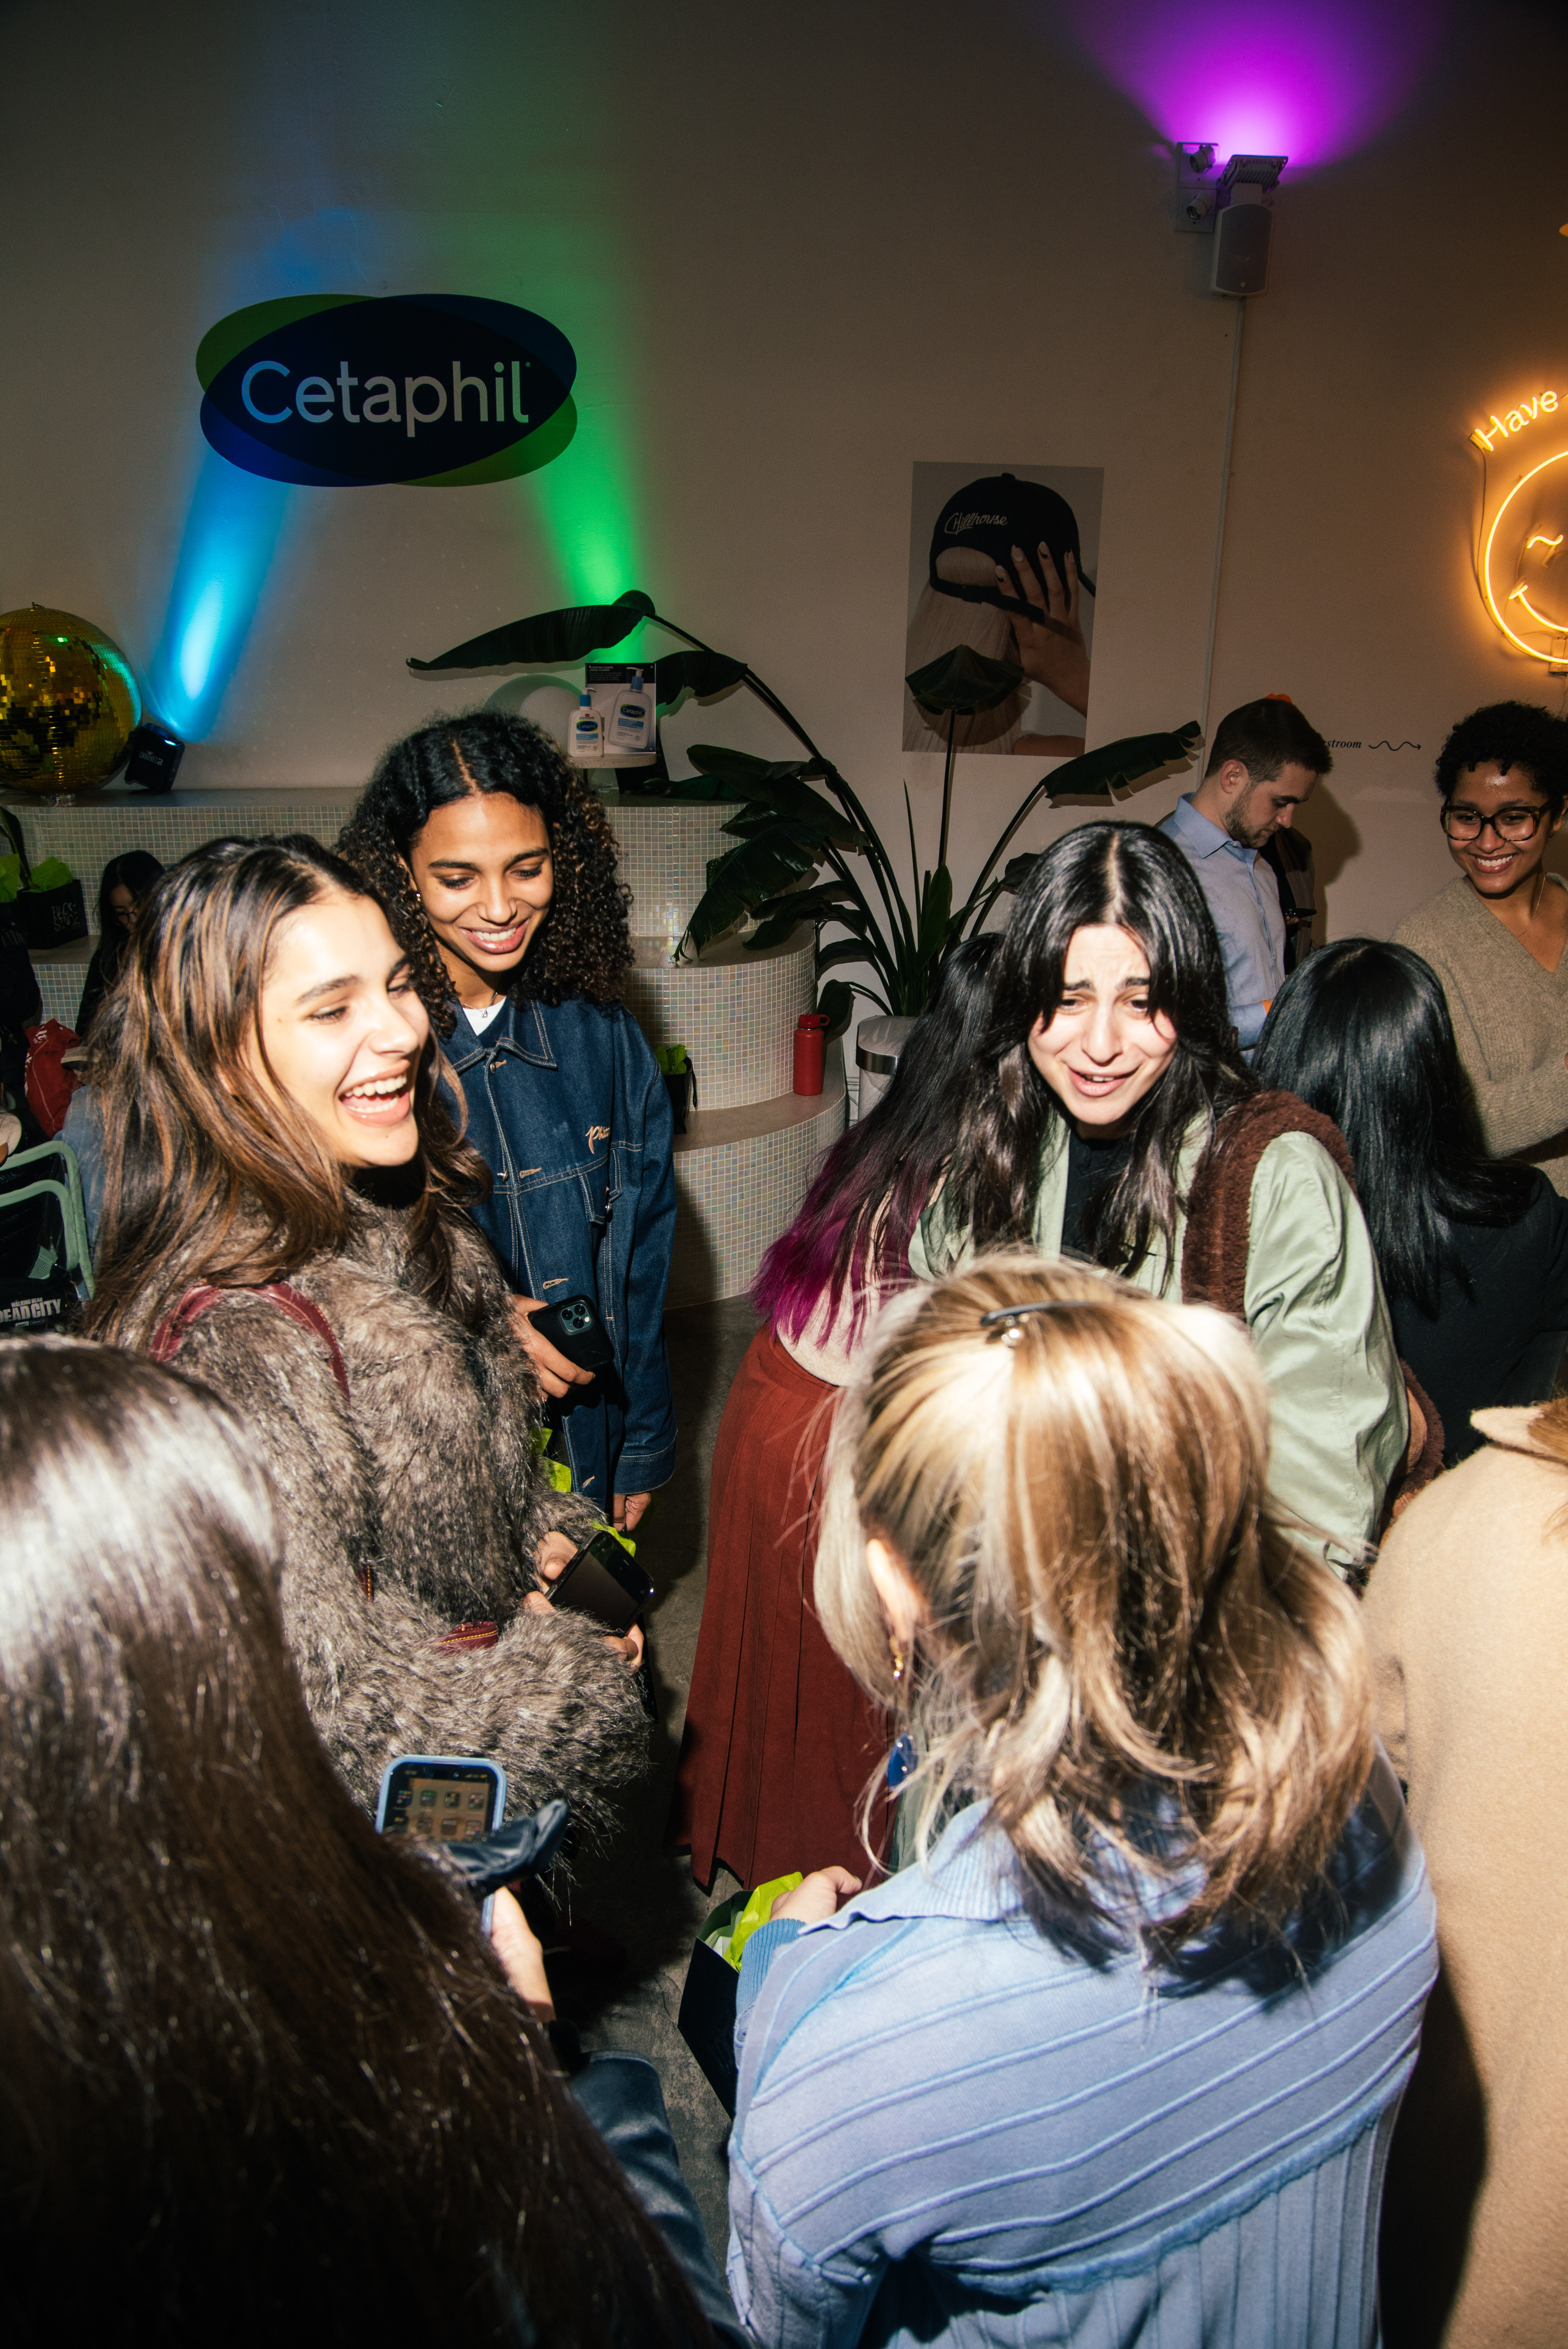 Highsnobiety and Cetaphil event at Chillhouse in soho during New York Fashion Week